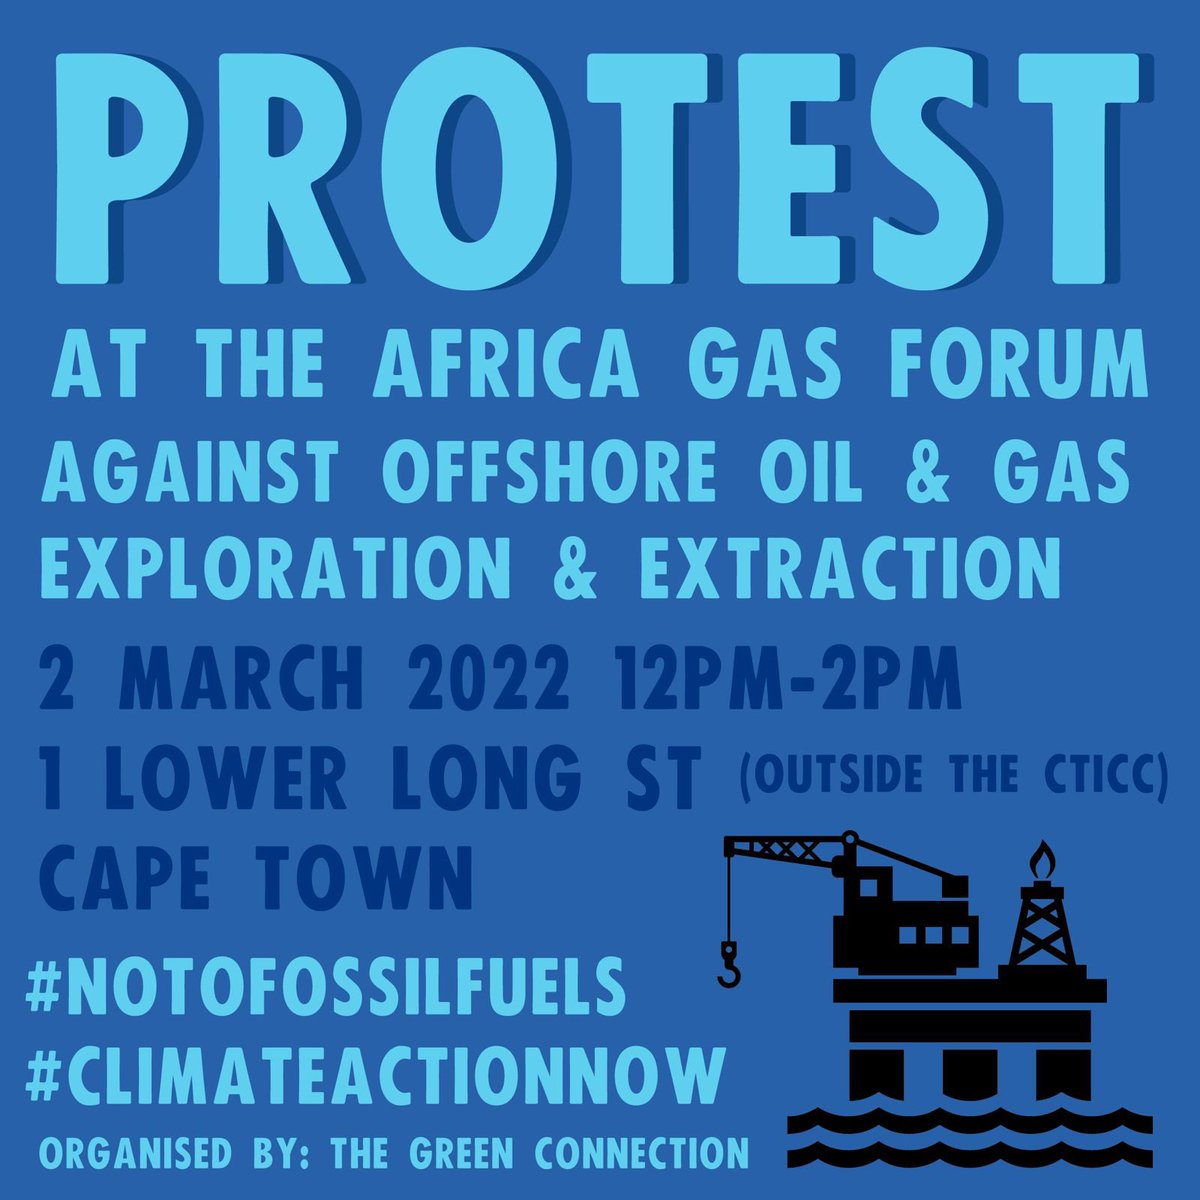 Protest today! The Africa Gas Forum congregates at CTICC to lobby for oil and gas exploration and production in Africa. Join the protest against this destructive course. For renewables. For a sustainable future. 

#gasIsNotGreen
#noMoreFossilFuels 
#uprootTheDmre.